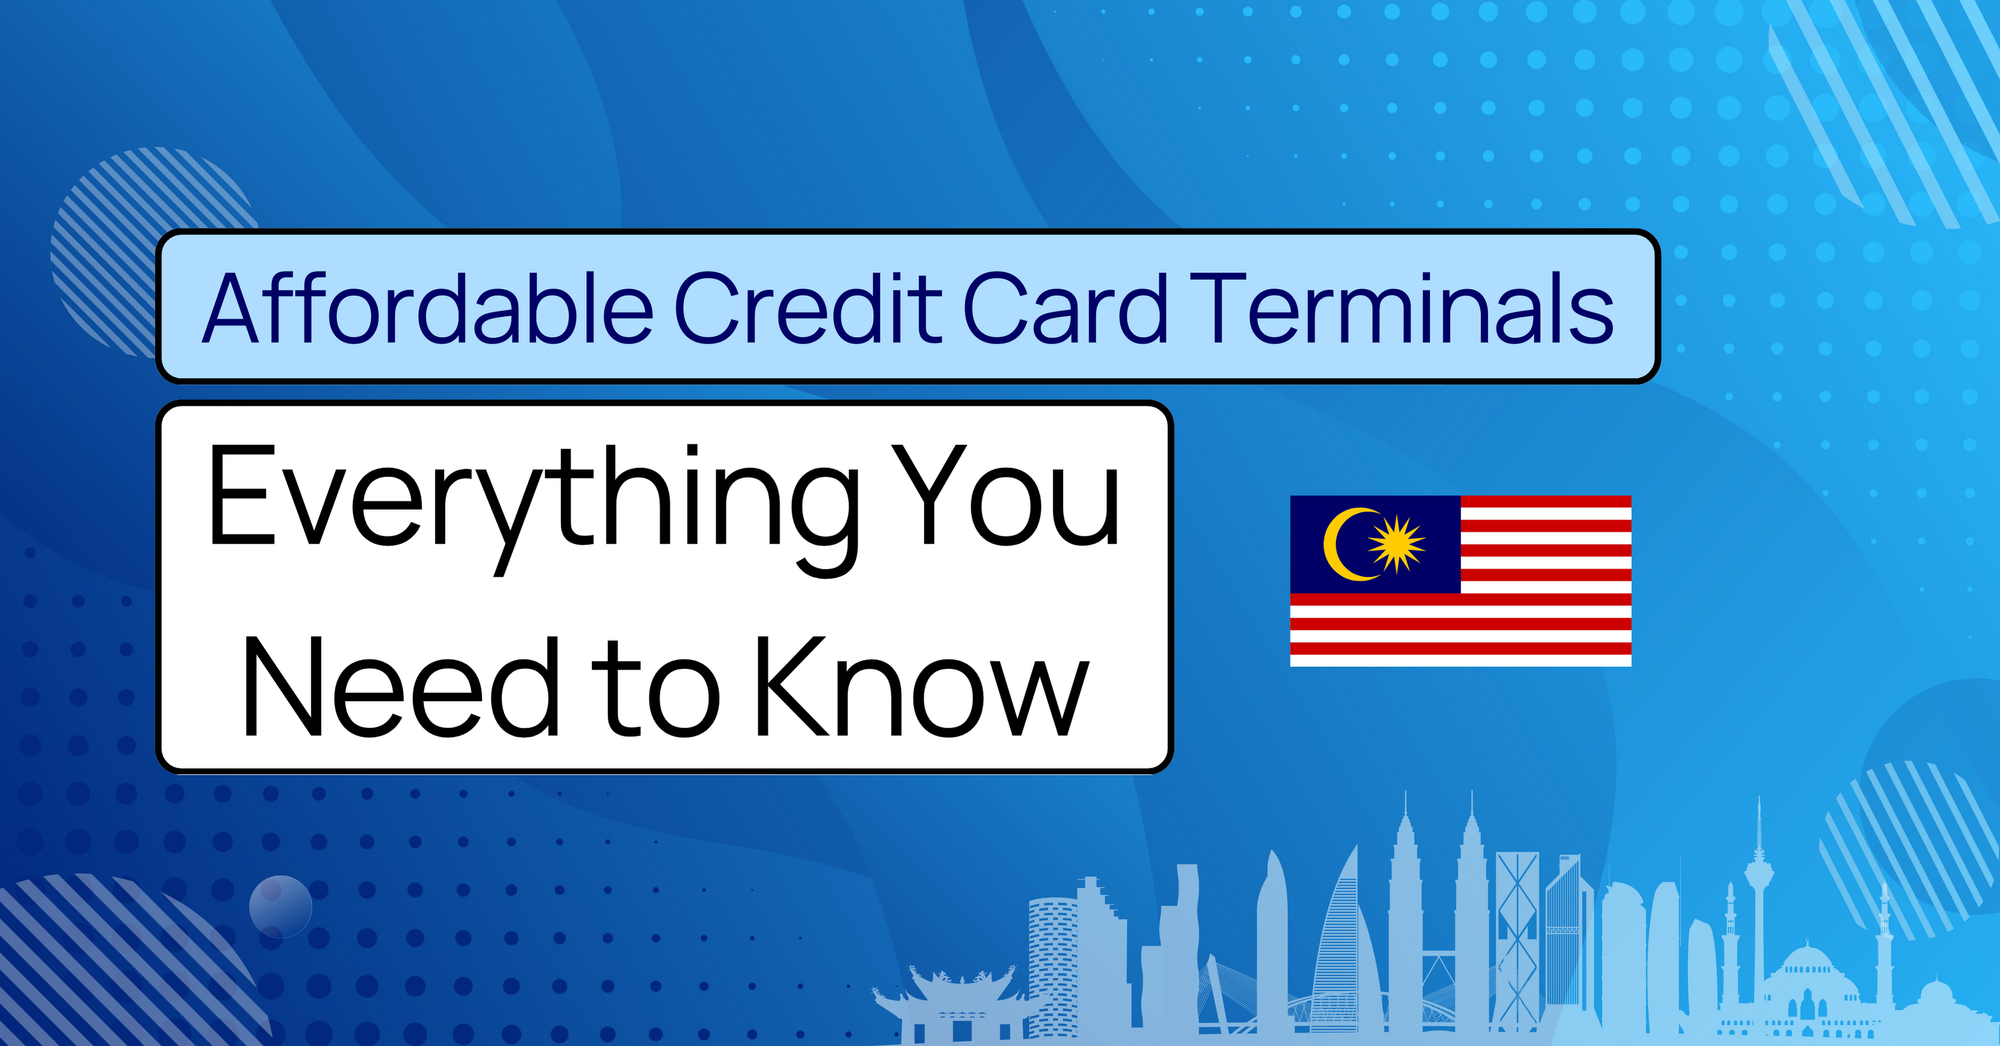 Affordable Credit Card Terminals in Malaysia: Everything You Need to Know